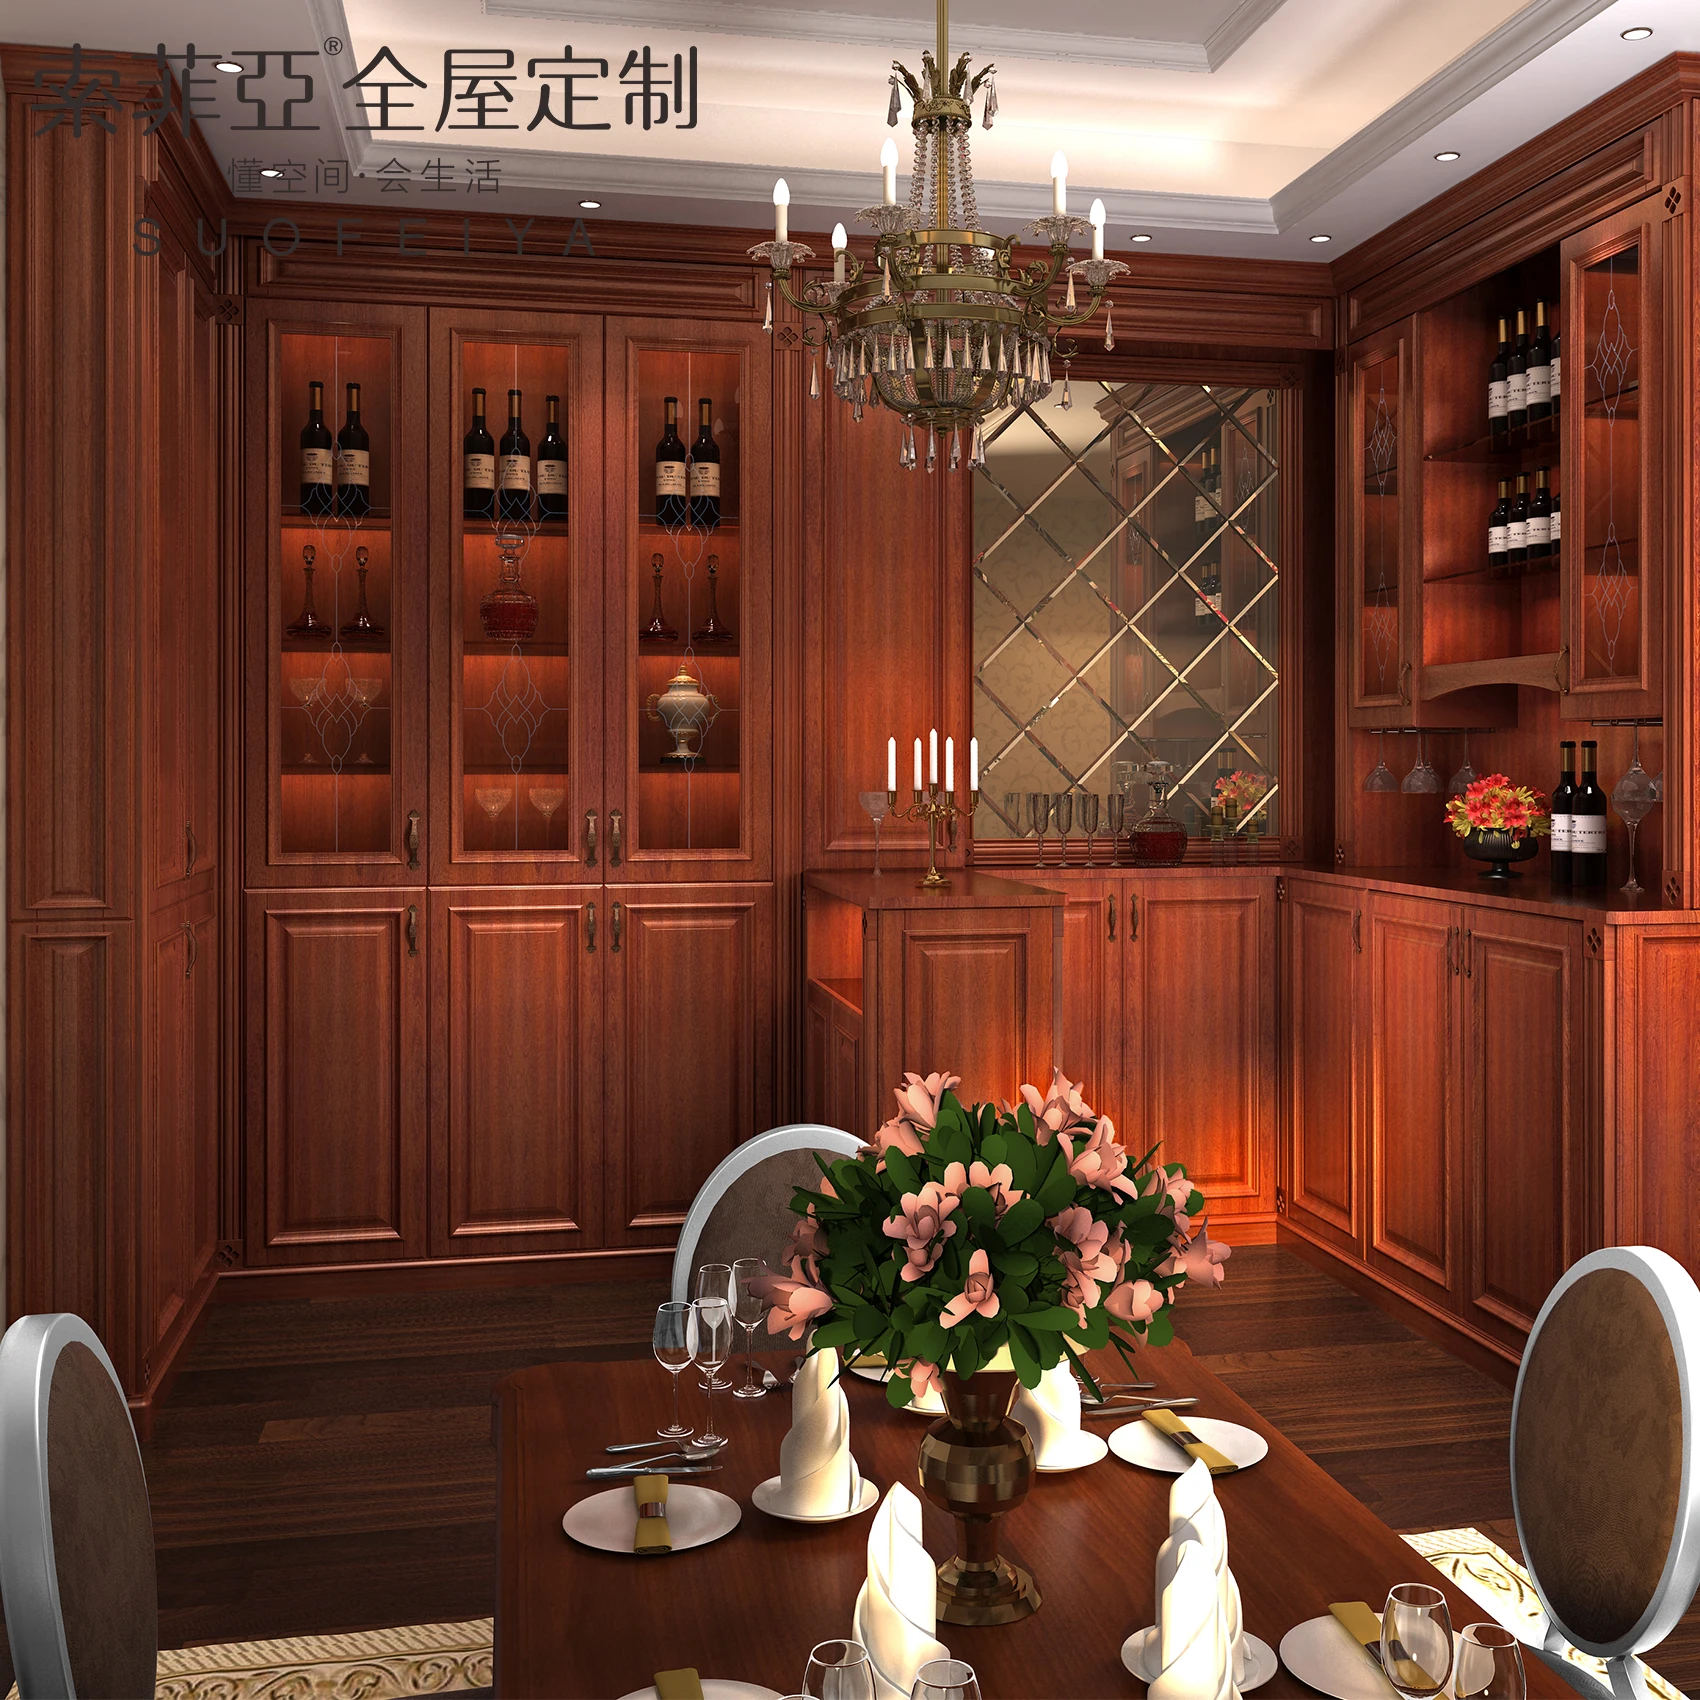 Chinese Antique Wooden Furniture Cabinet Design For Living Room